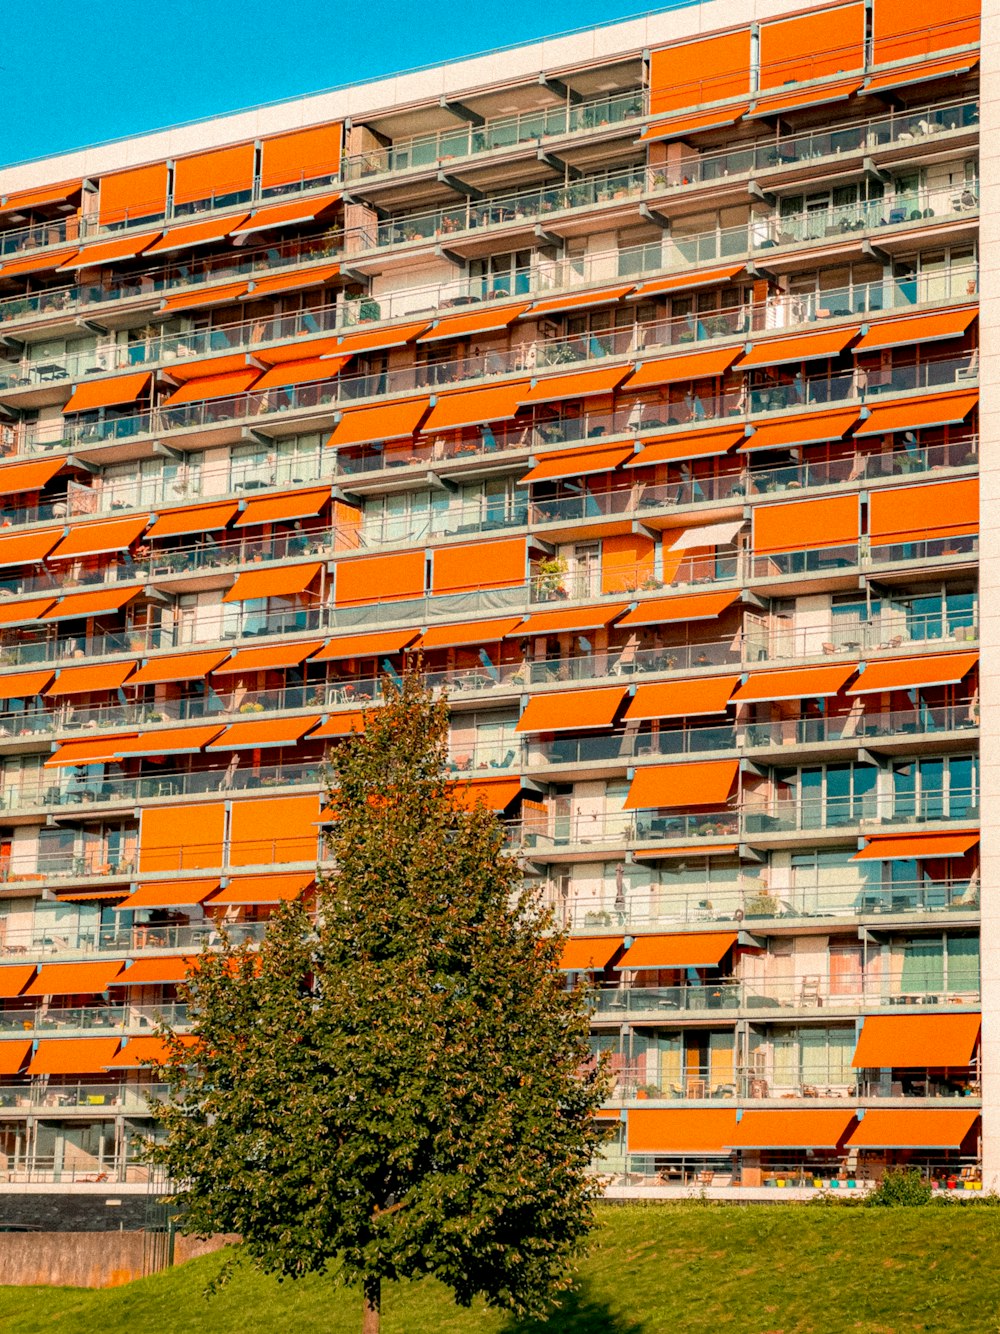 an orange apartment building with balconies and balconies